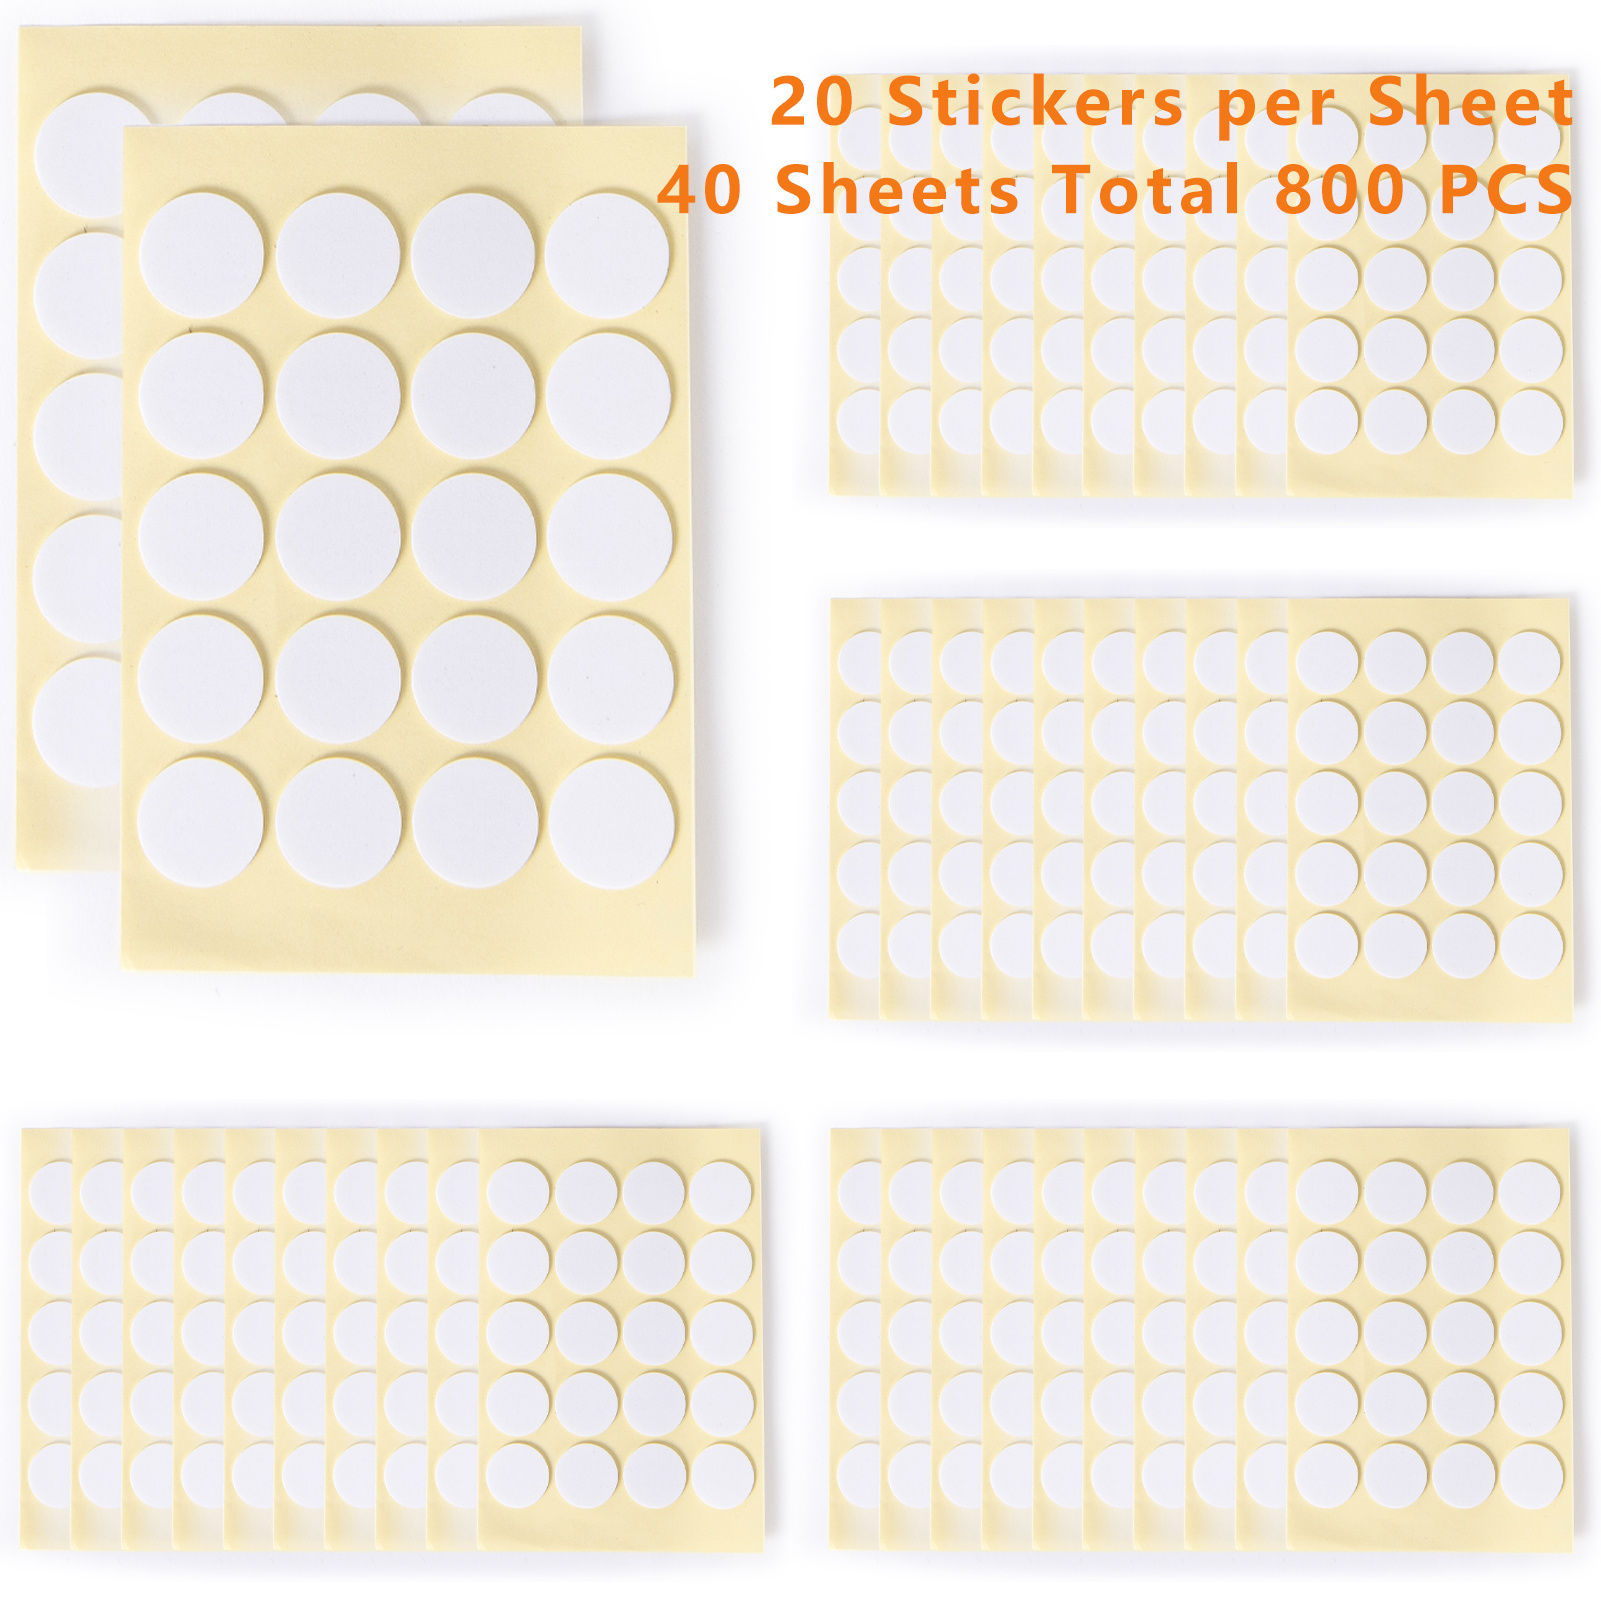 Hemoton Clear Double Sided Tape 120pcs Candle Wick Stickers, Heat Resistance Double- Sided Stickers, Adhere Steady in Hot Wax Stickers for Candle